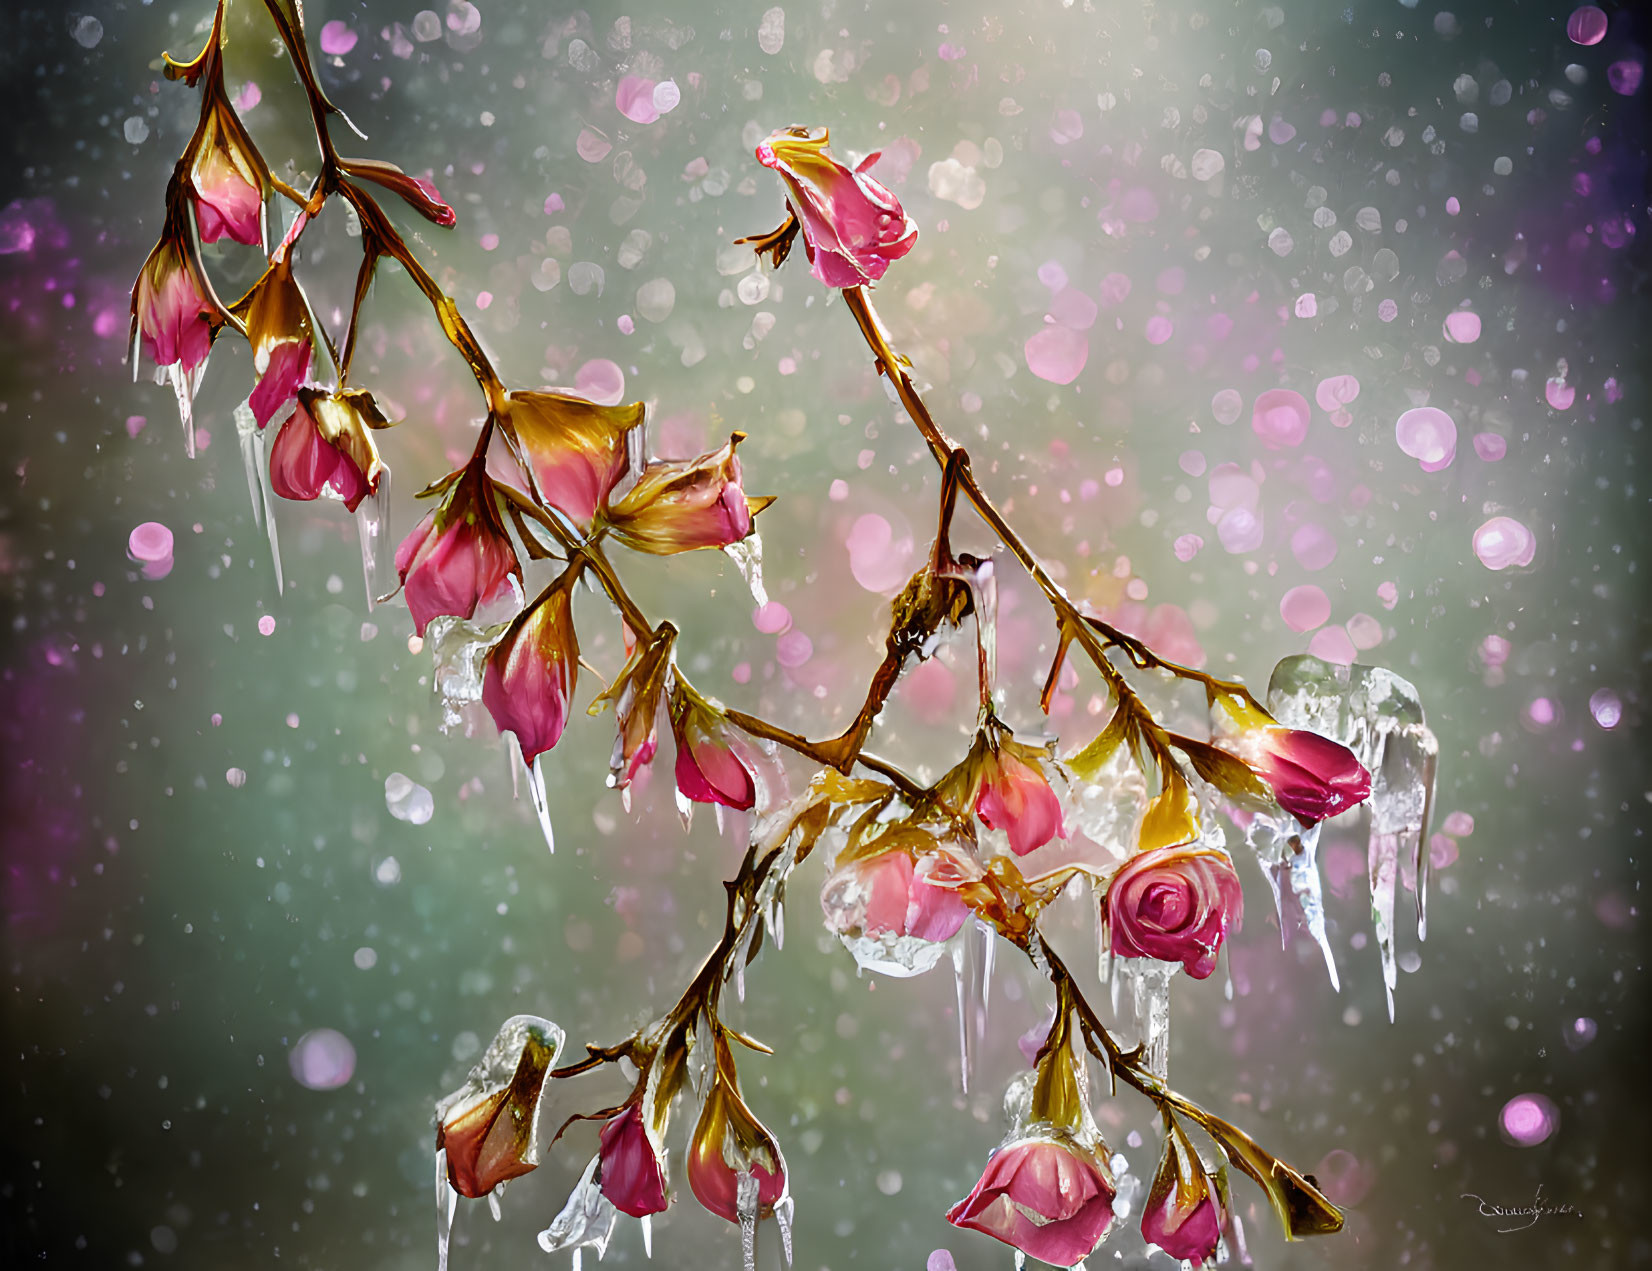 Digital Art: Branch with Pink Flowers Frozen in Ice on Bokeh Background